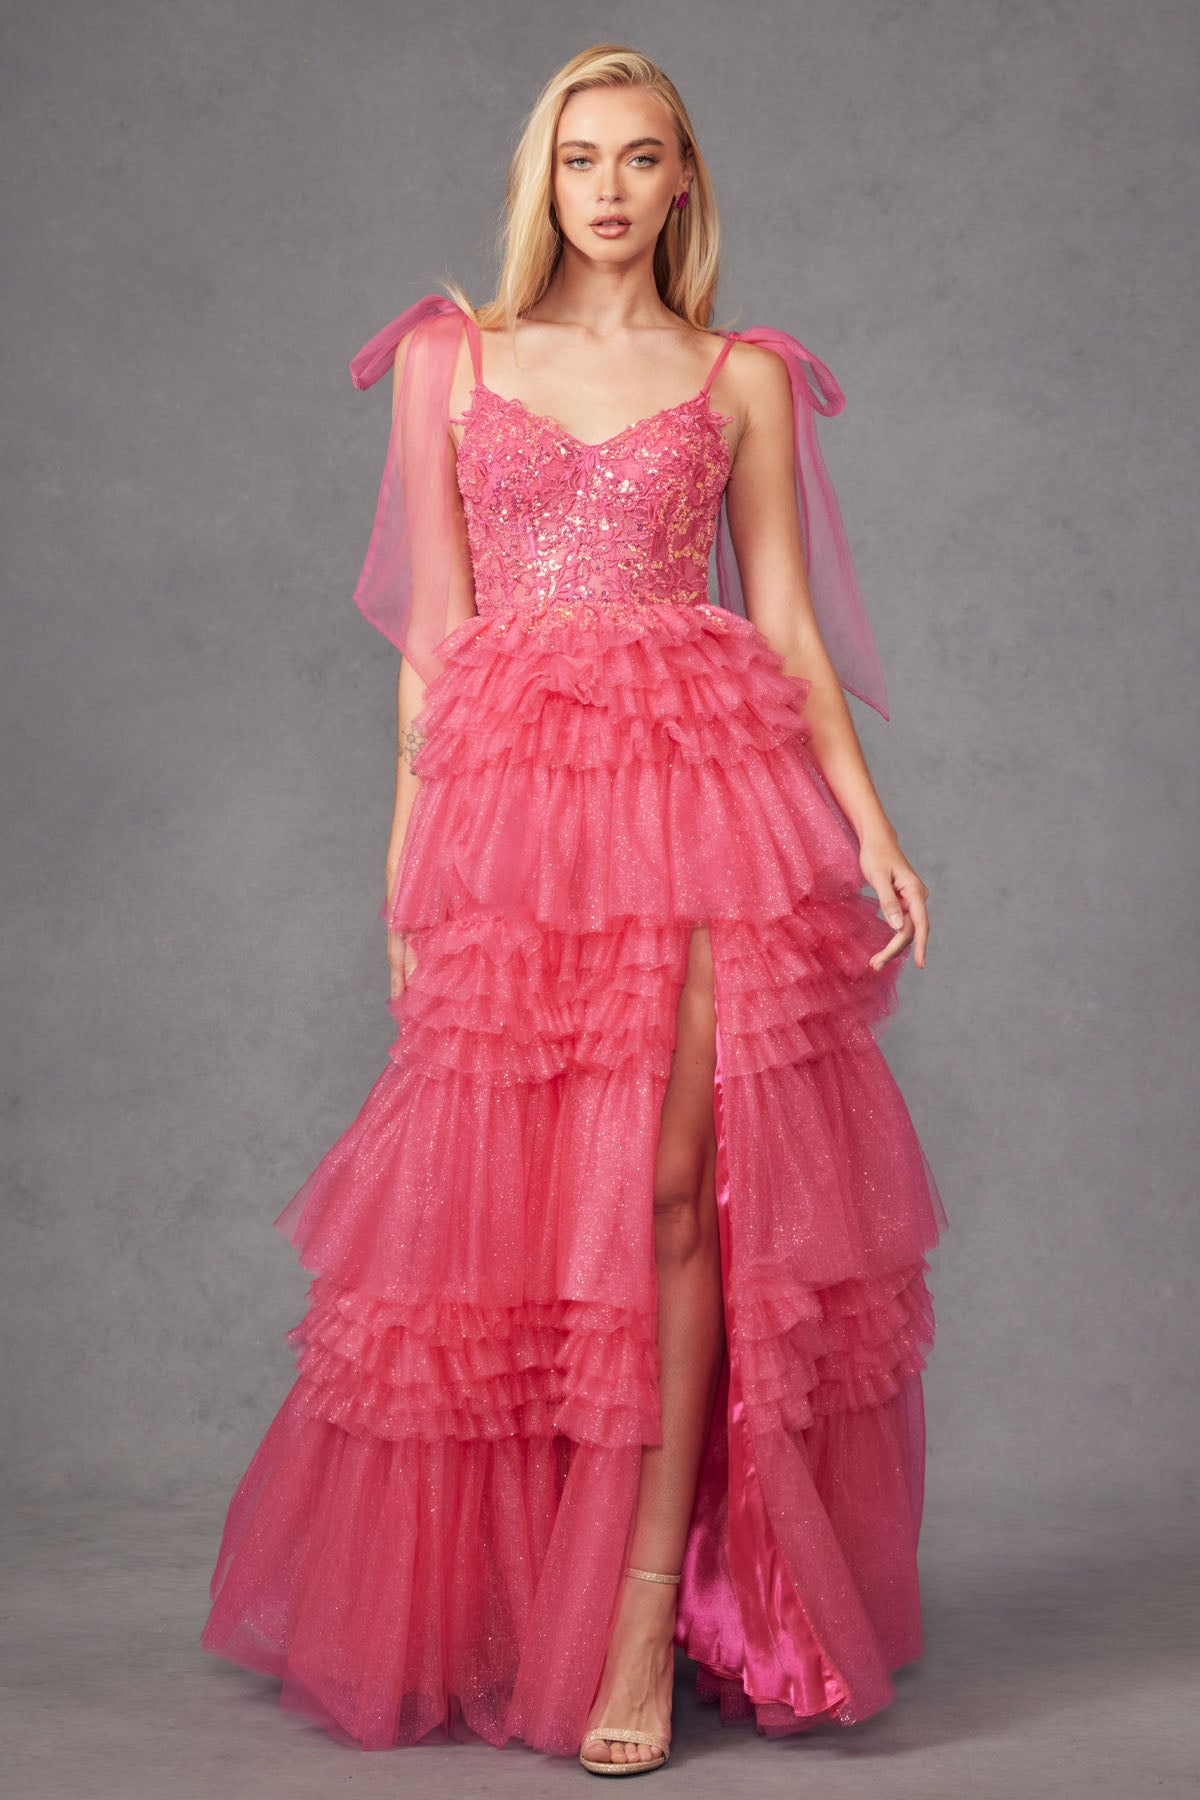 Prom Dresses Tiered Ruffle Skirt Long Formal Prom Gown Fuchsia